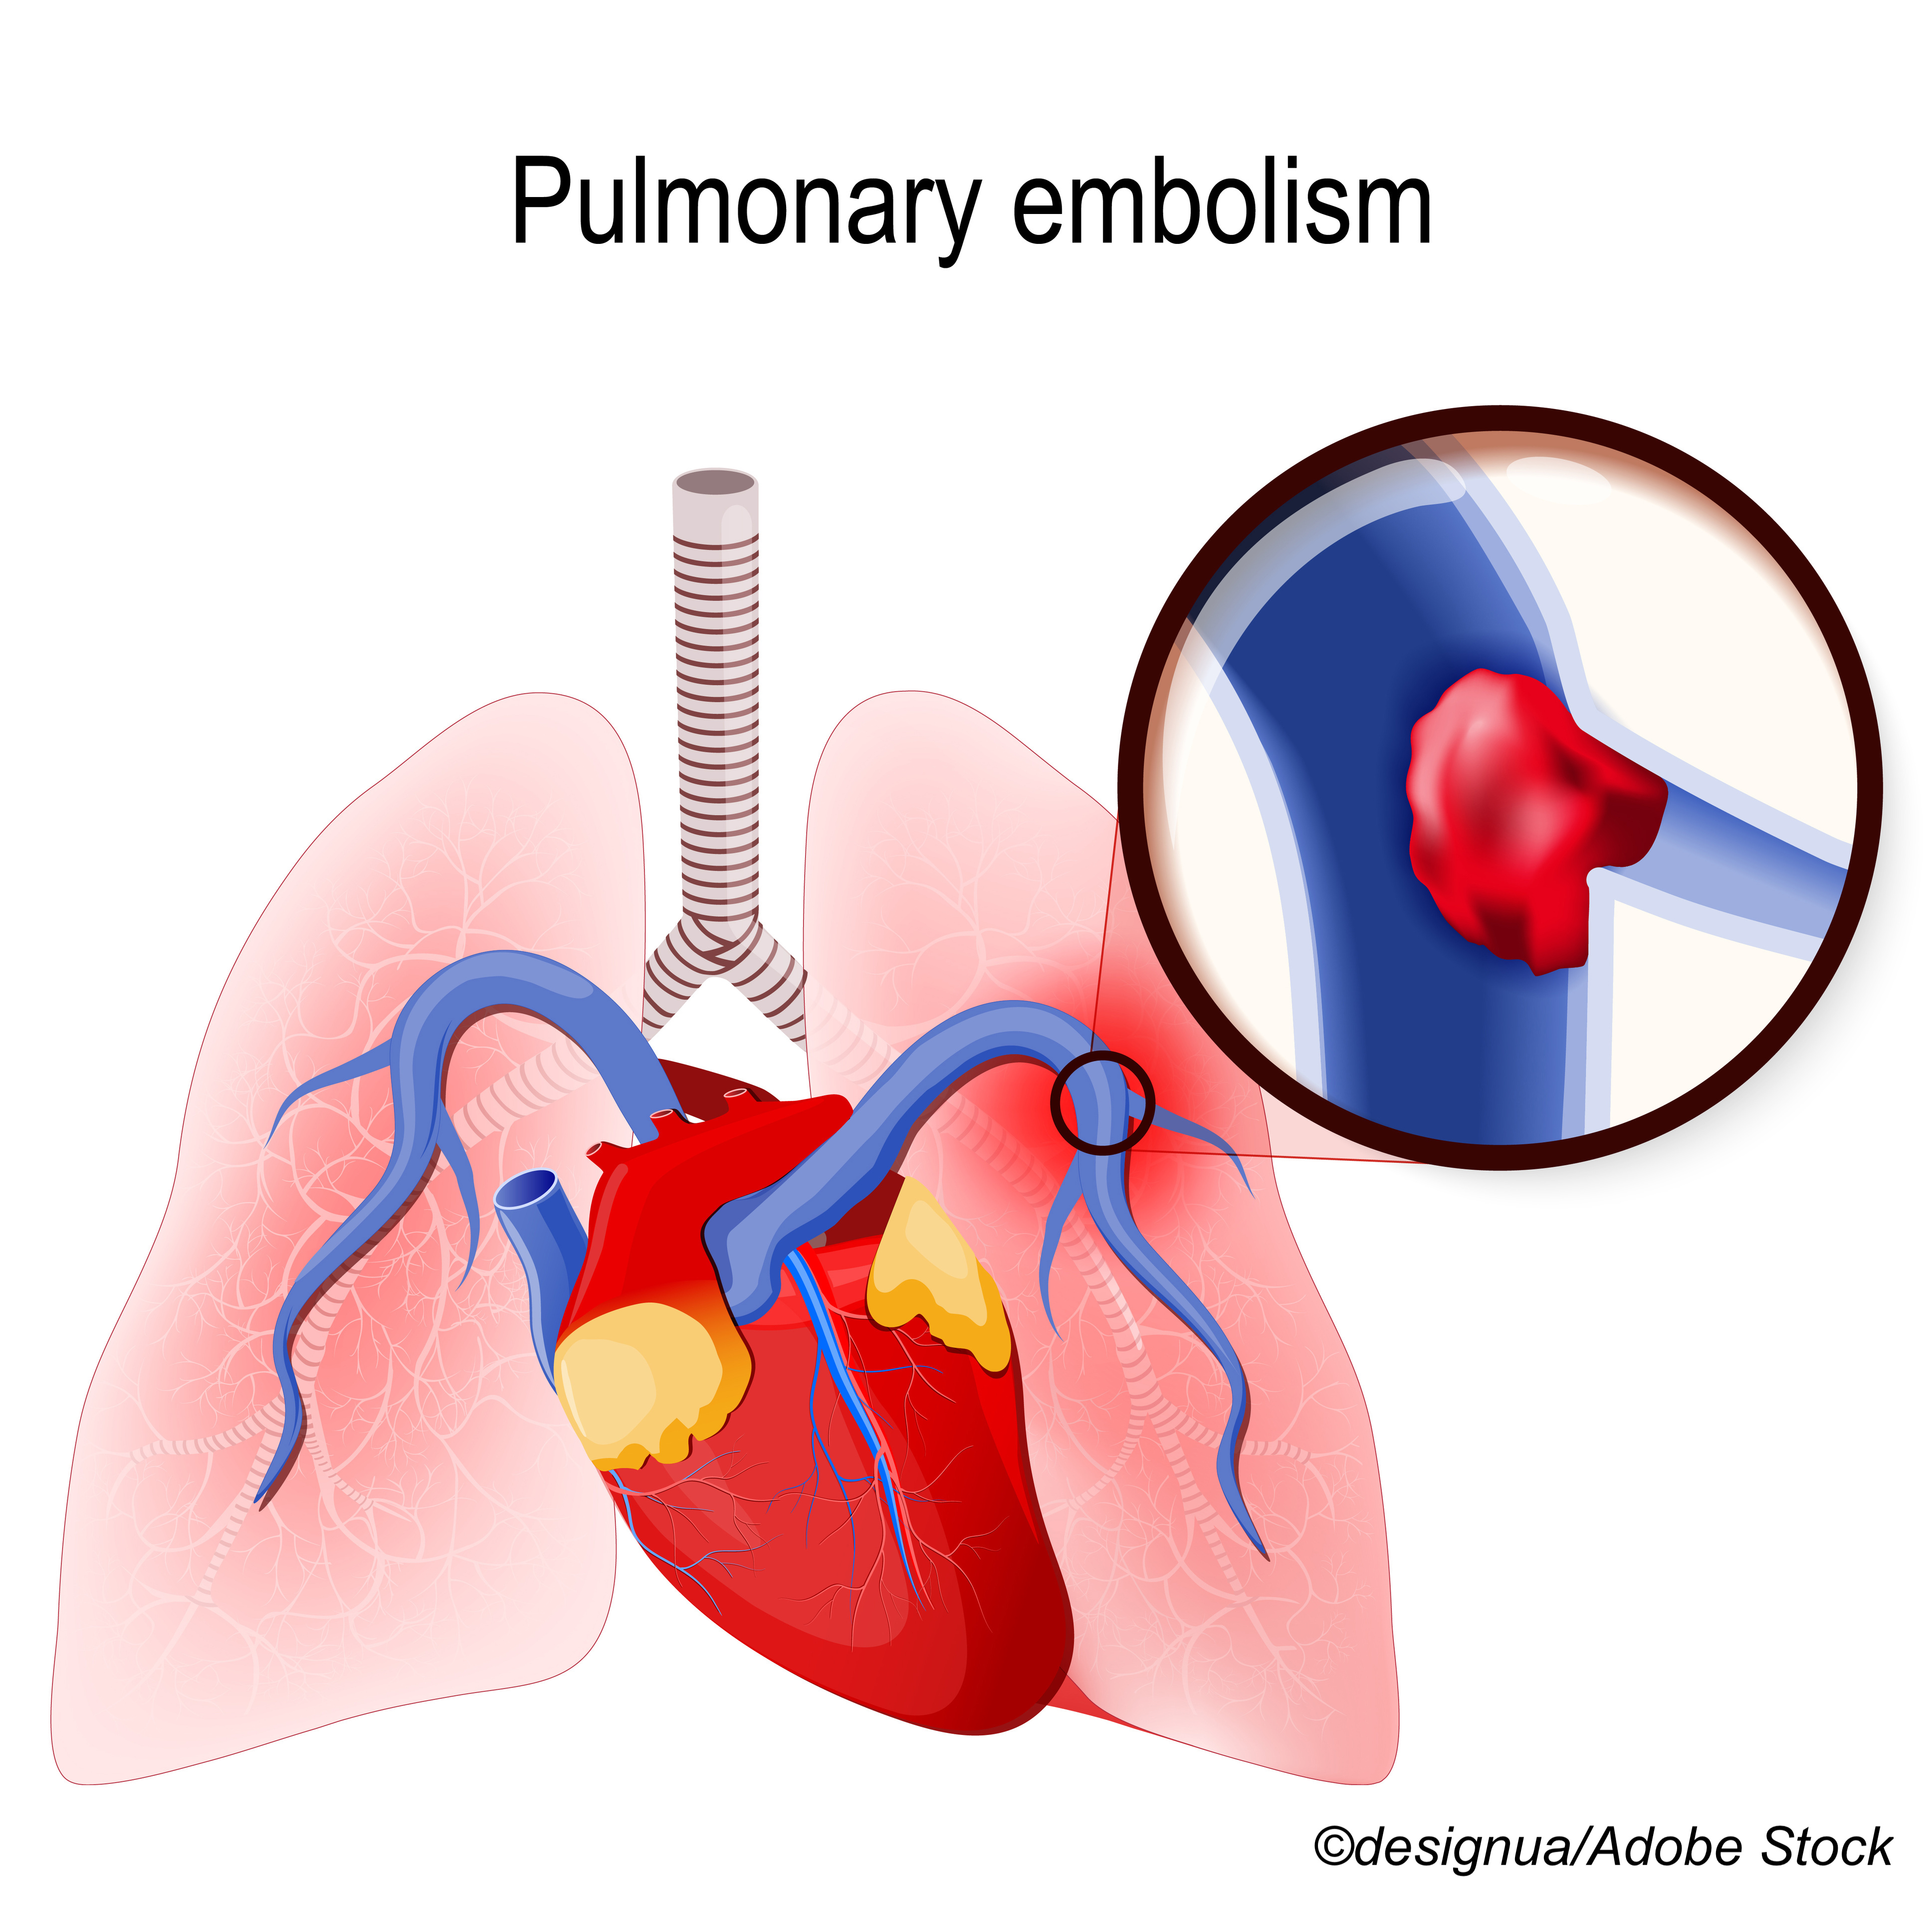 Patients With Subsegmental Pulmonary Embolism Face Increased VTE Risk